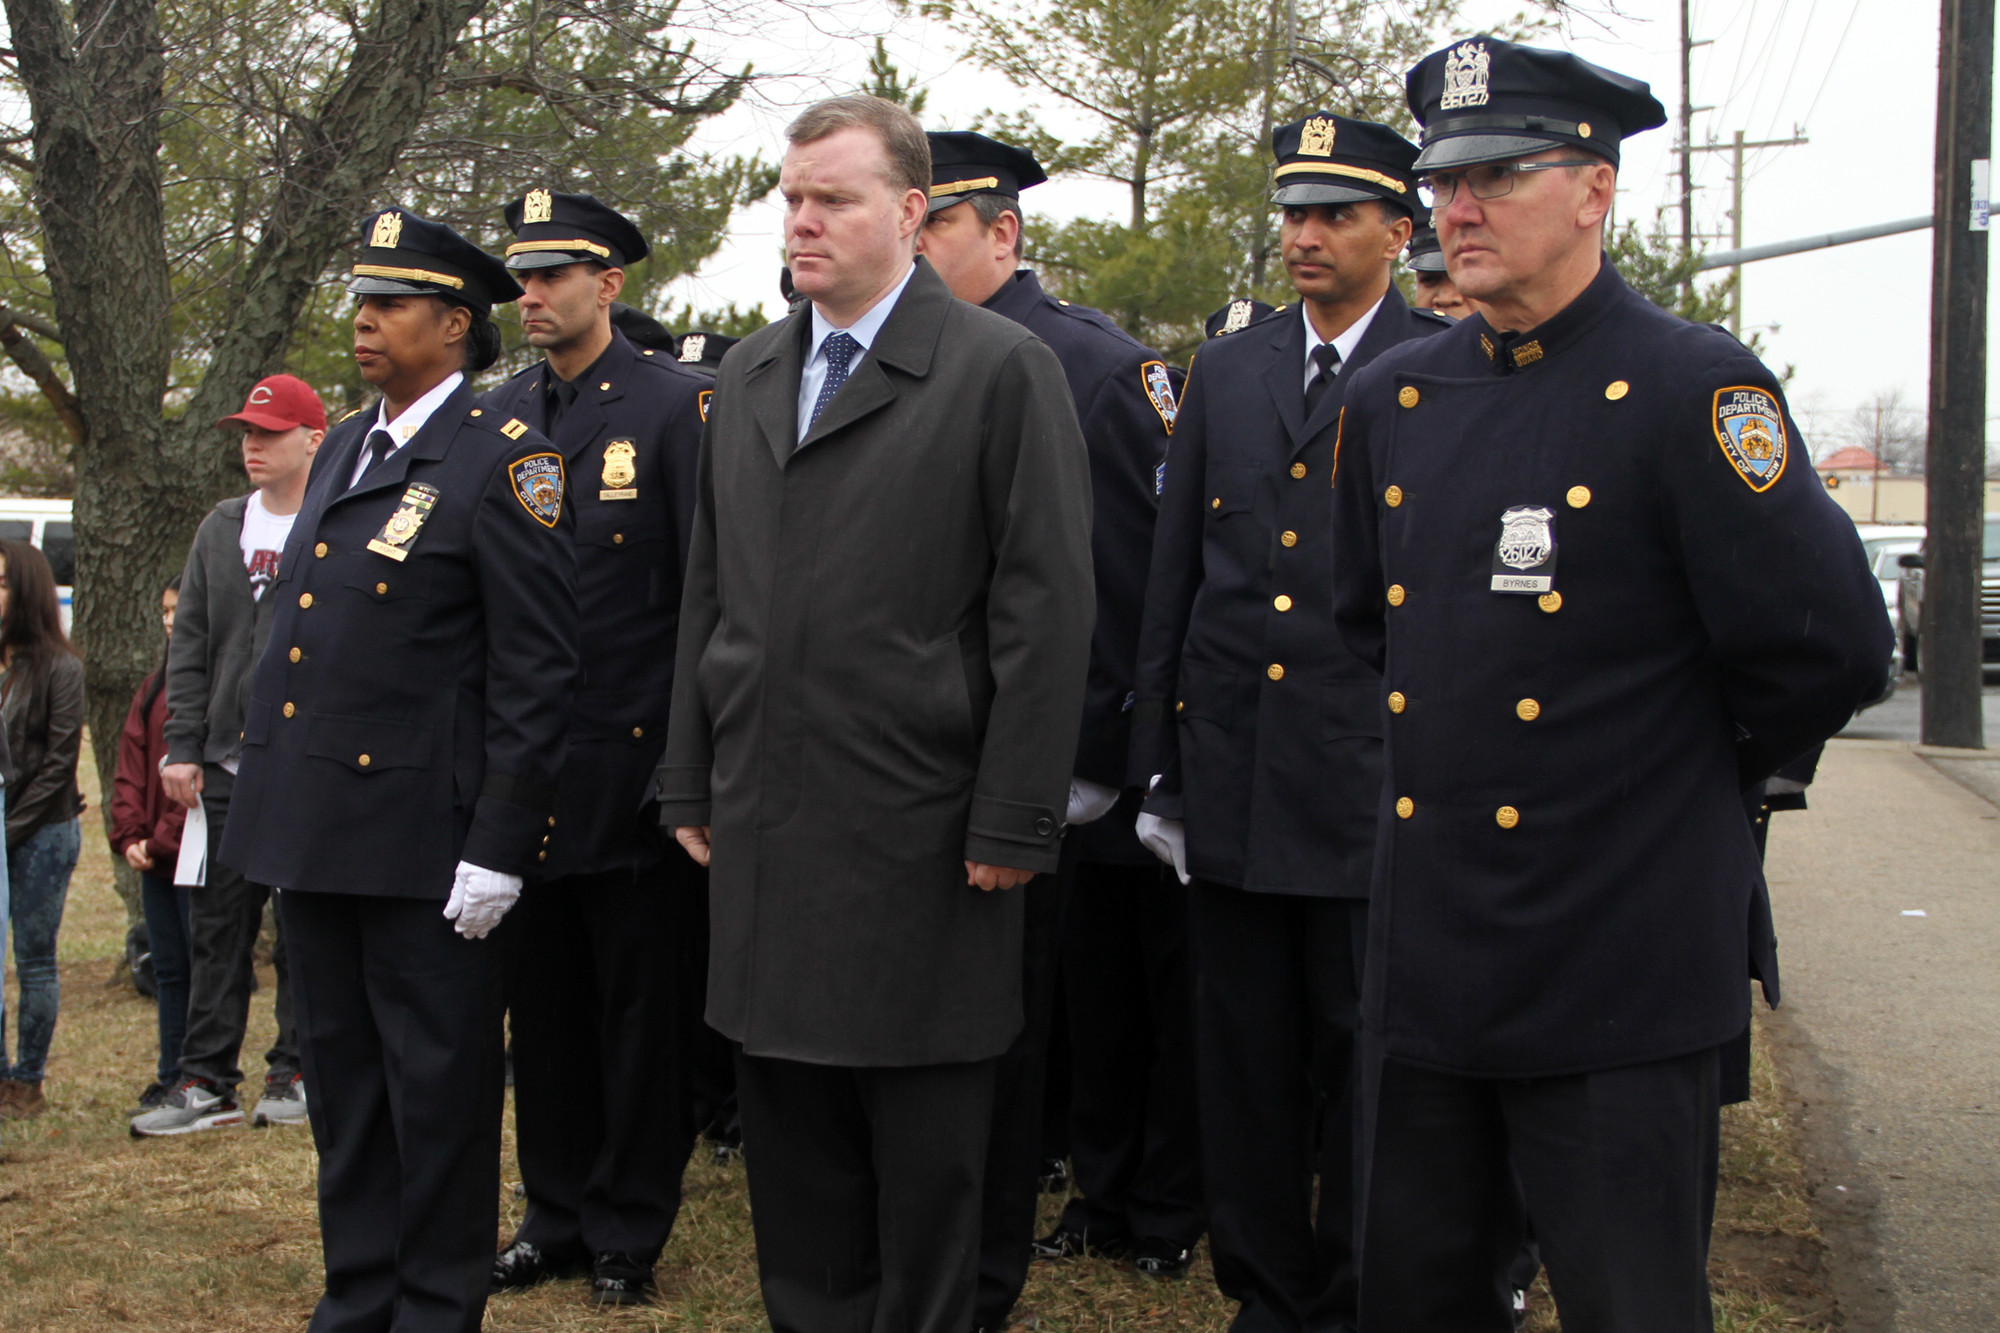 Dozens of NYPD officers came to East Meadow to pay their respects.